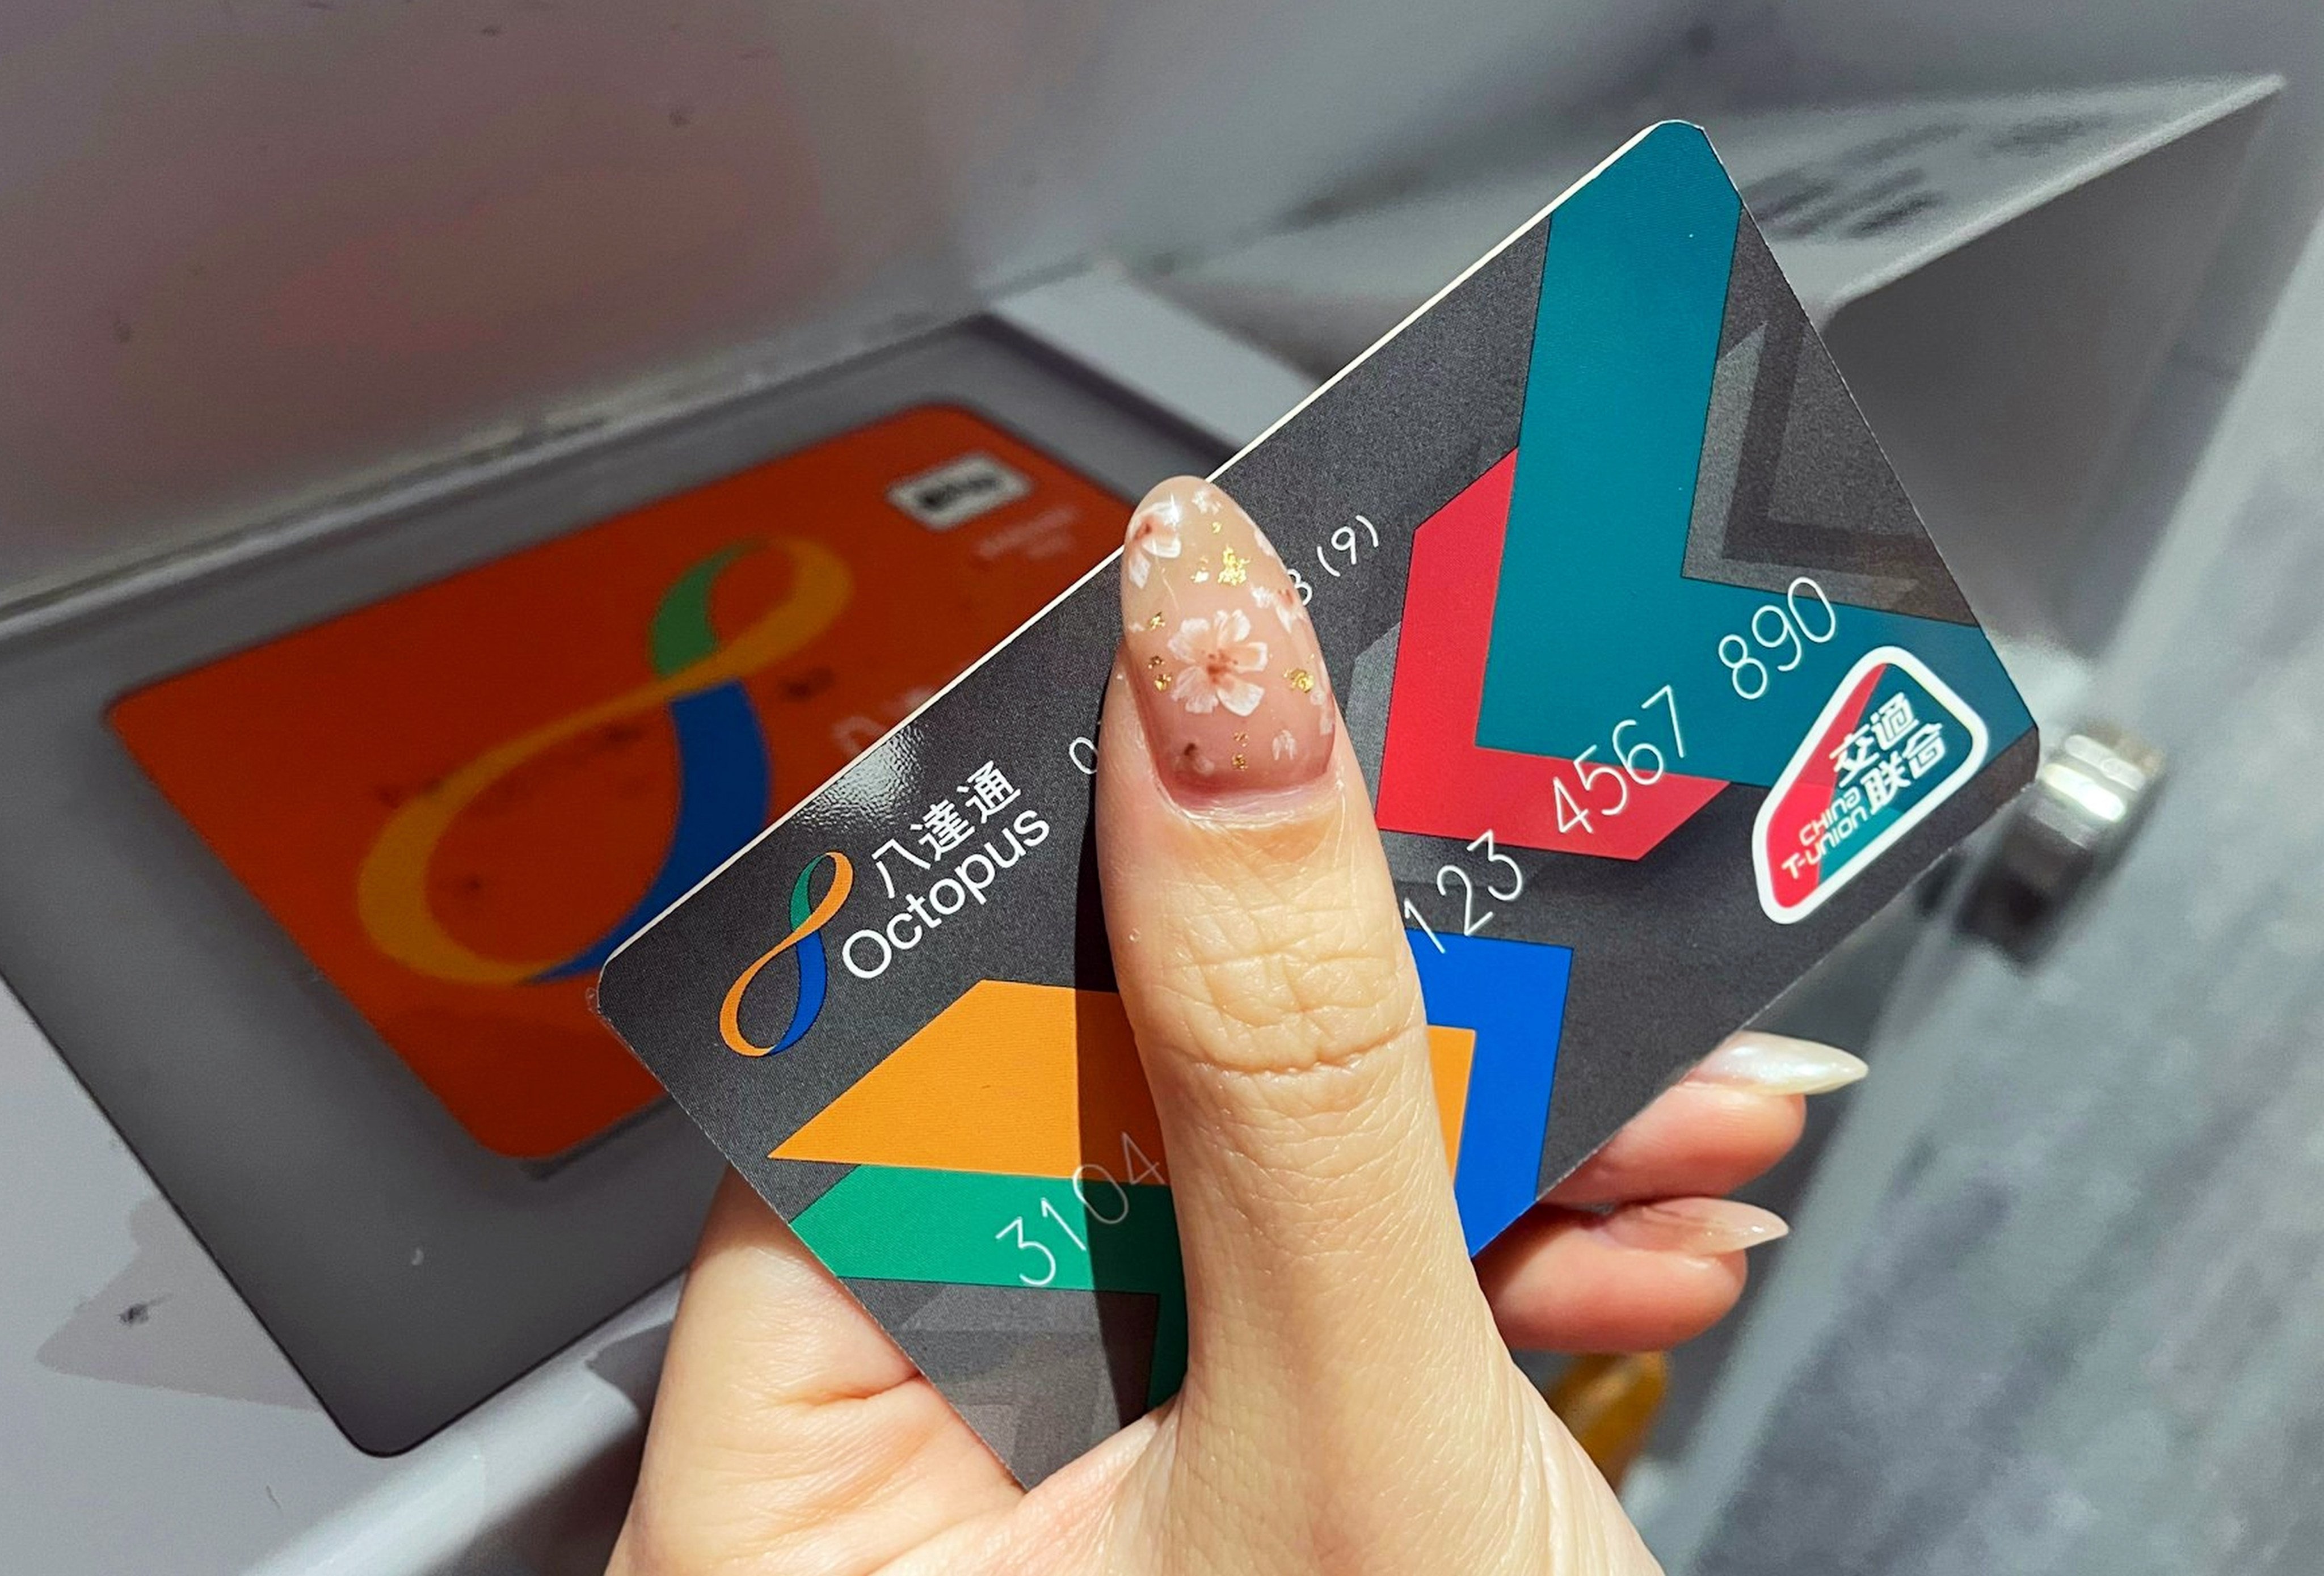 The new Octopus card allows users to tap for rides on public transport across 336 mainland China cities. Photo: Handout